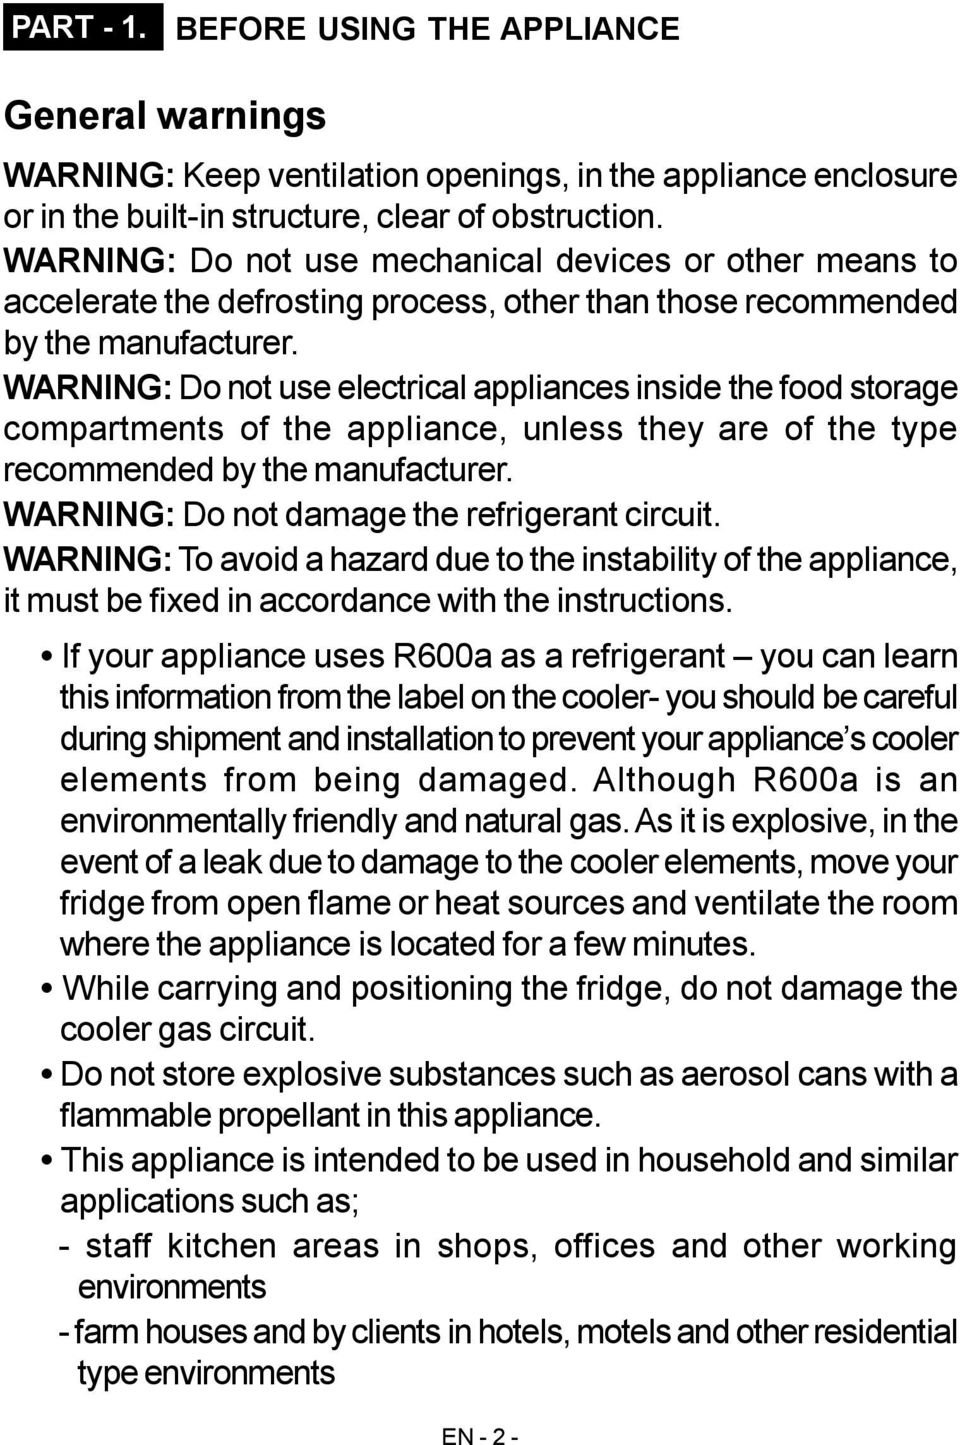 WARNING: Do not use electrical appliances inside the food storage compartments of the appliance, unless they are of the type recommended by the manufacturer.